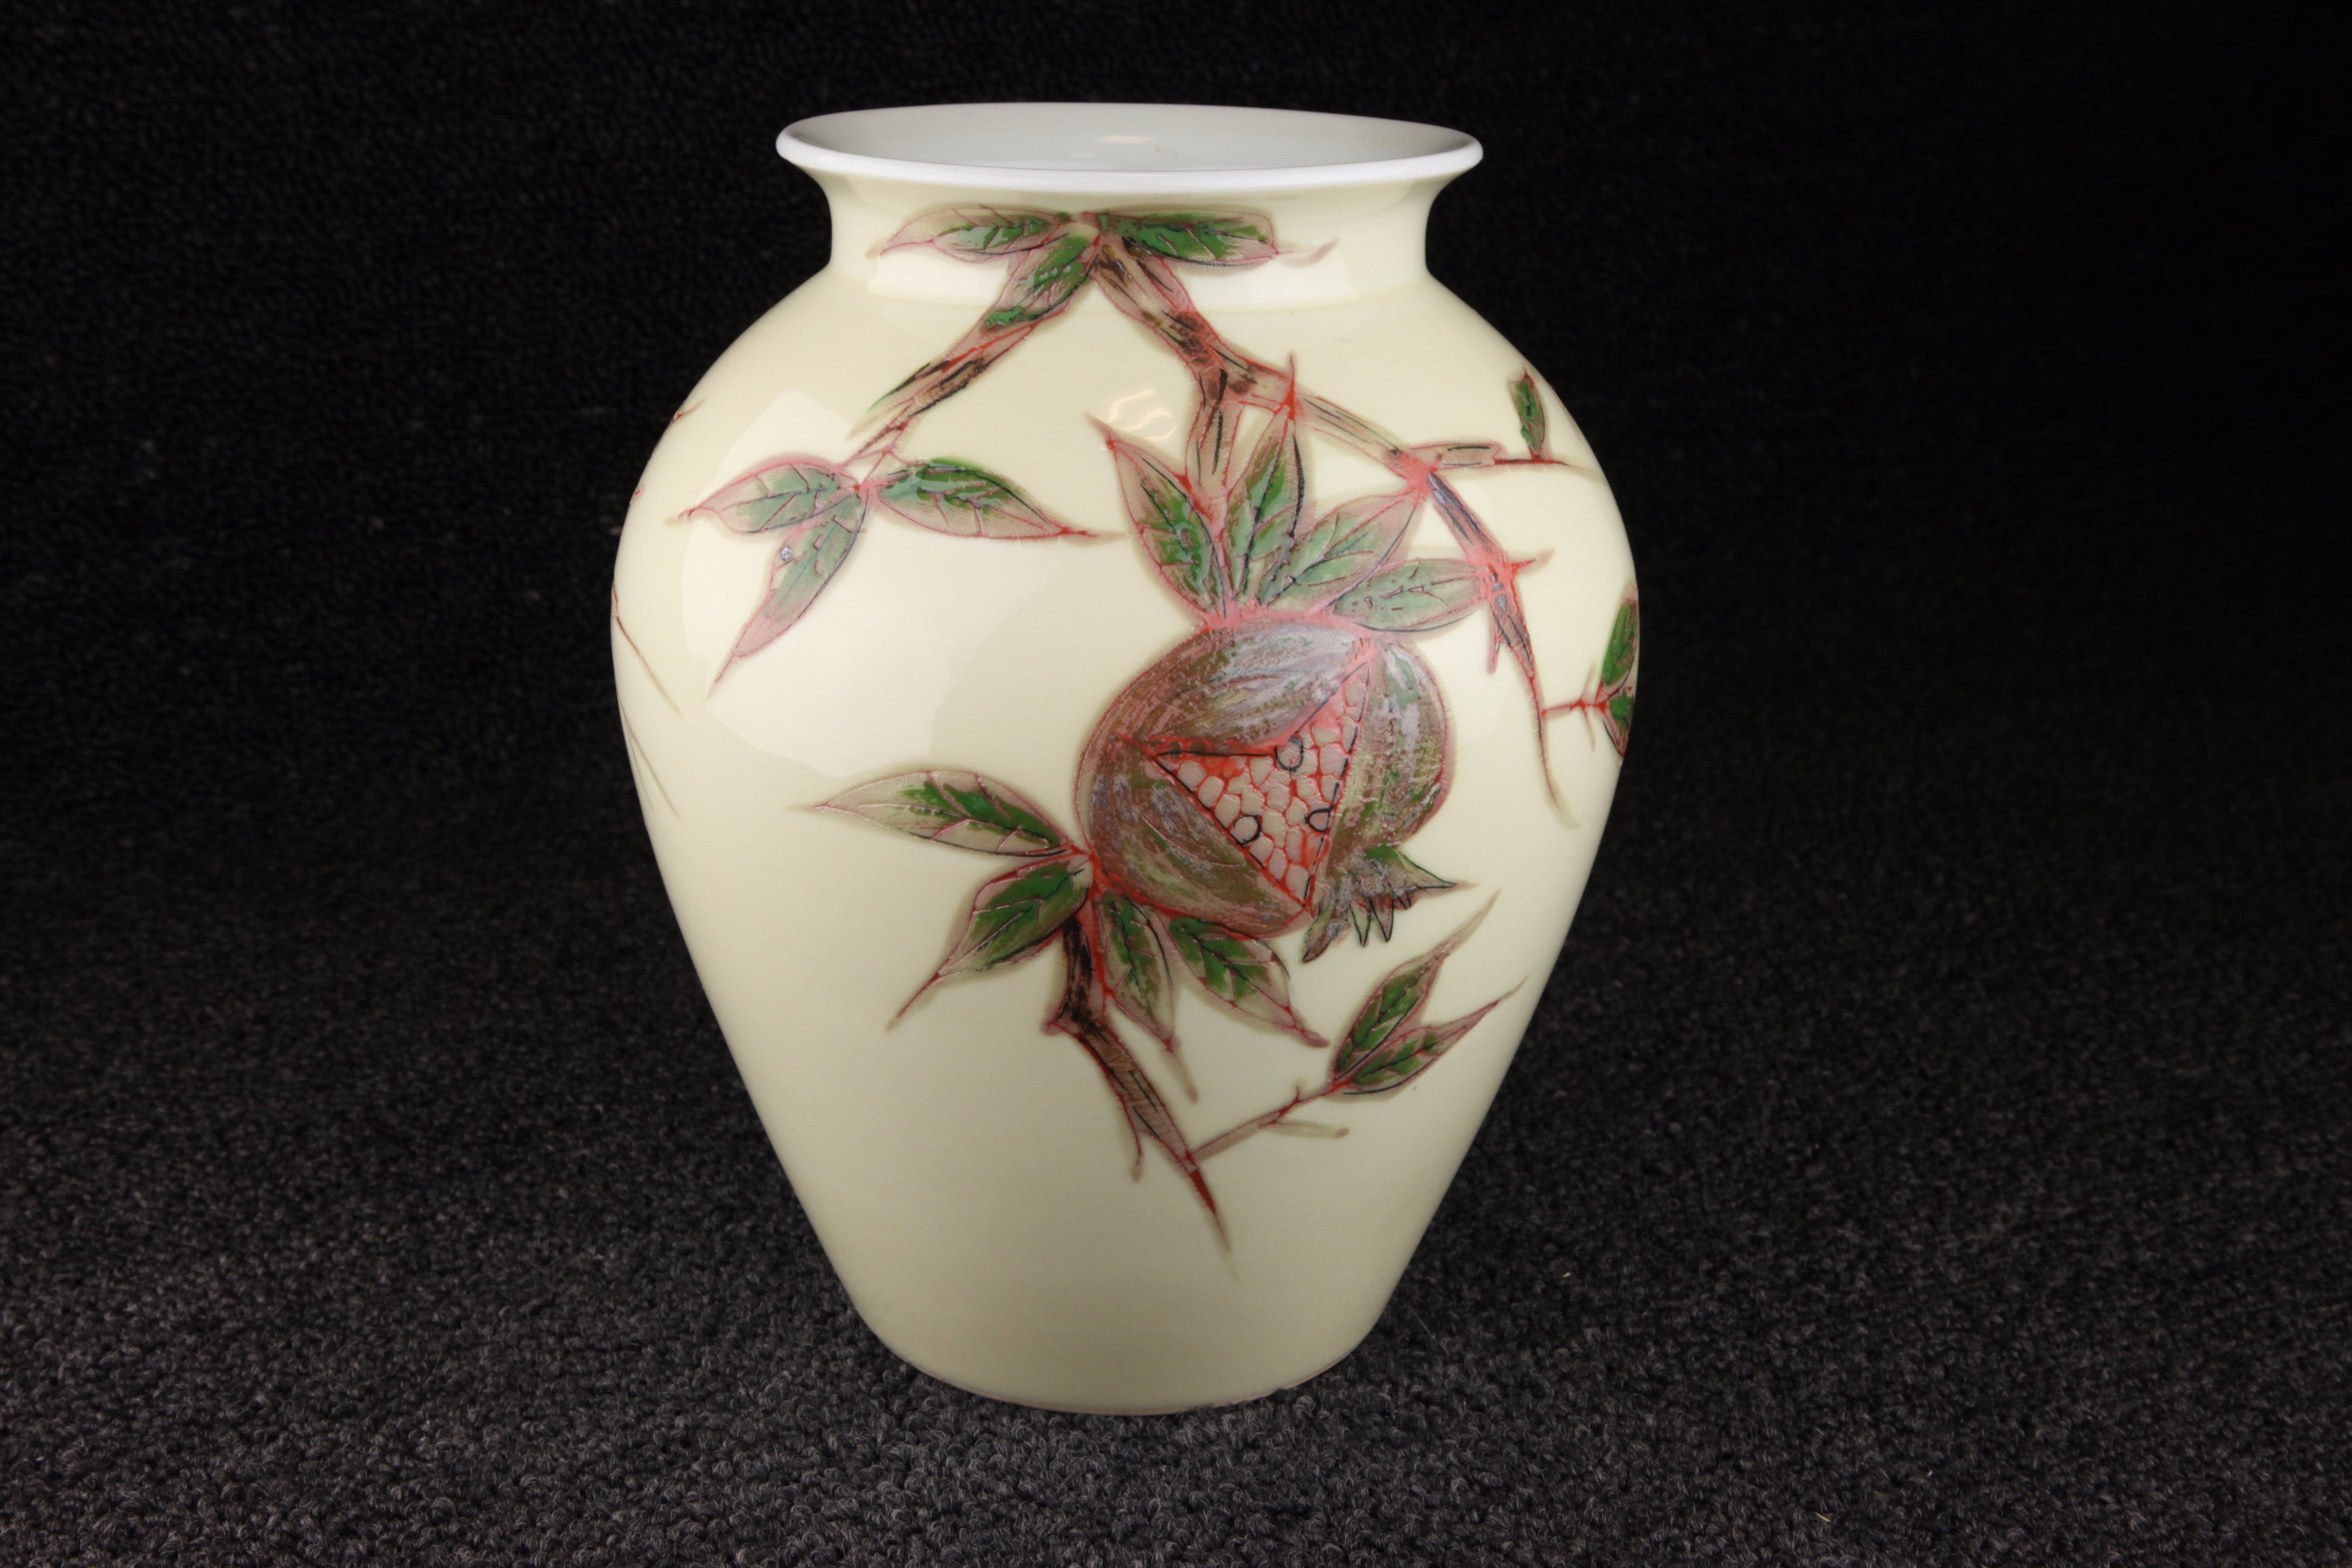 Vintage Japanese flower vase with punica granatum pattern in red, grey,  brown, and green - TLS Living